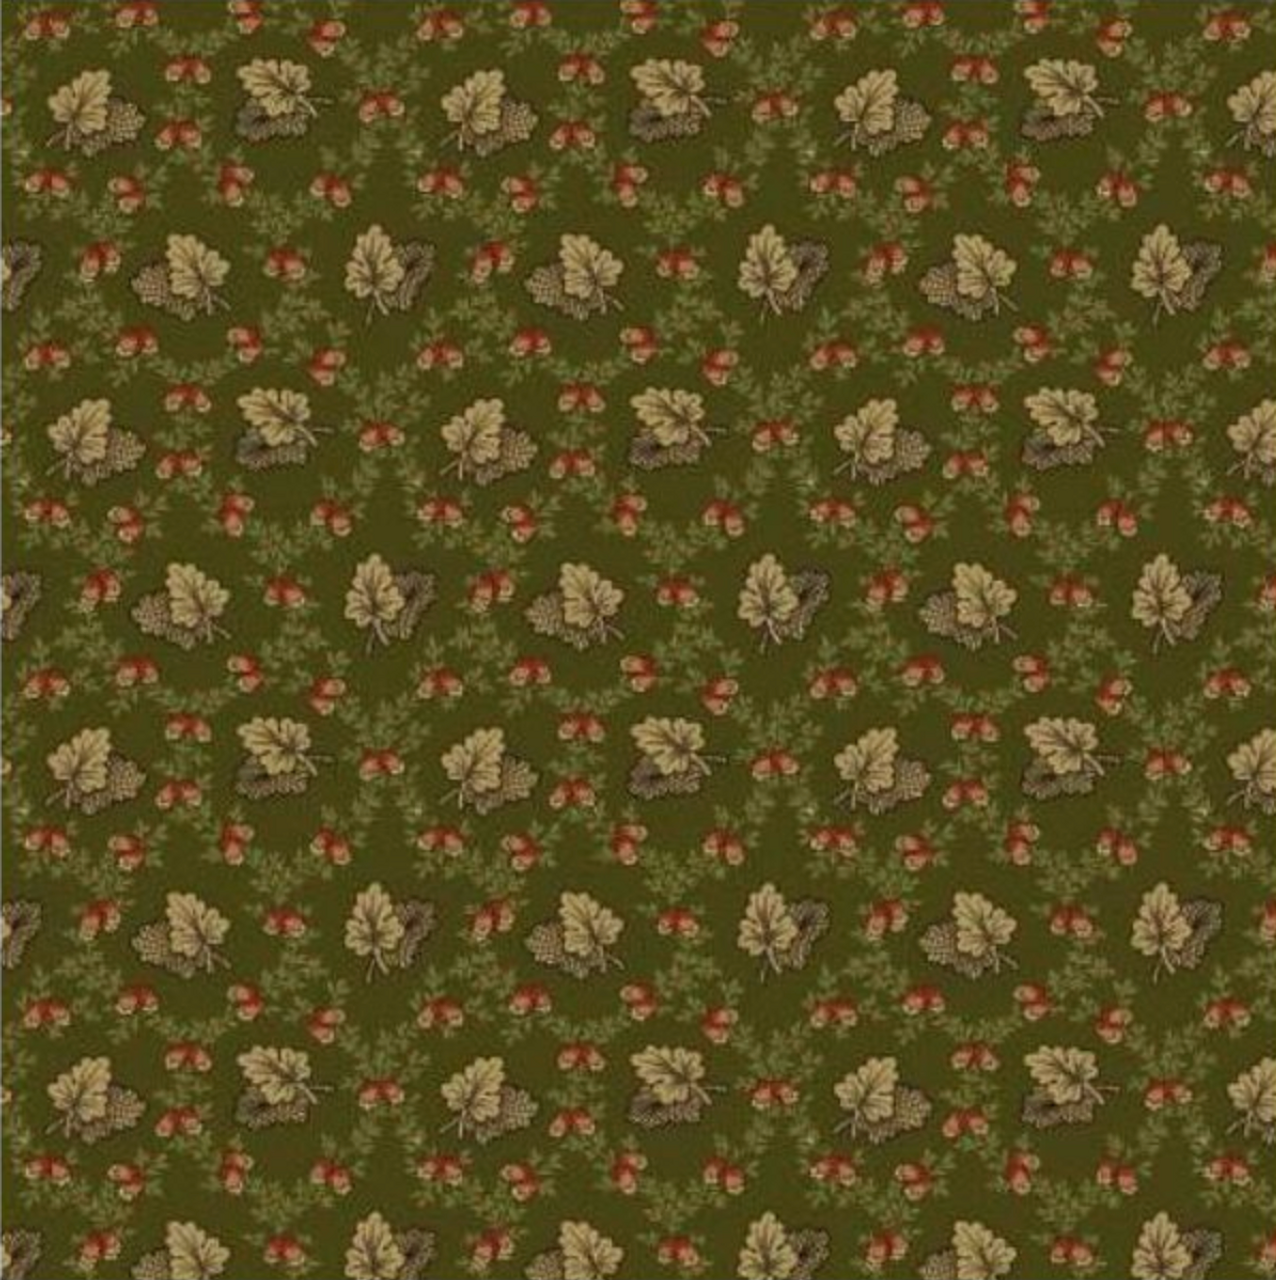 Henry Glass Autumn Spice Acorns & Oak Leaves Green Cotton Fabric By The Yard